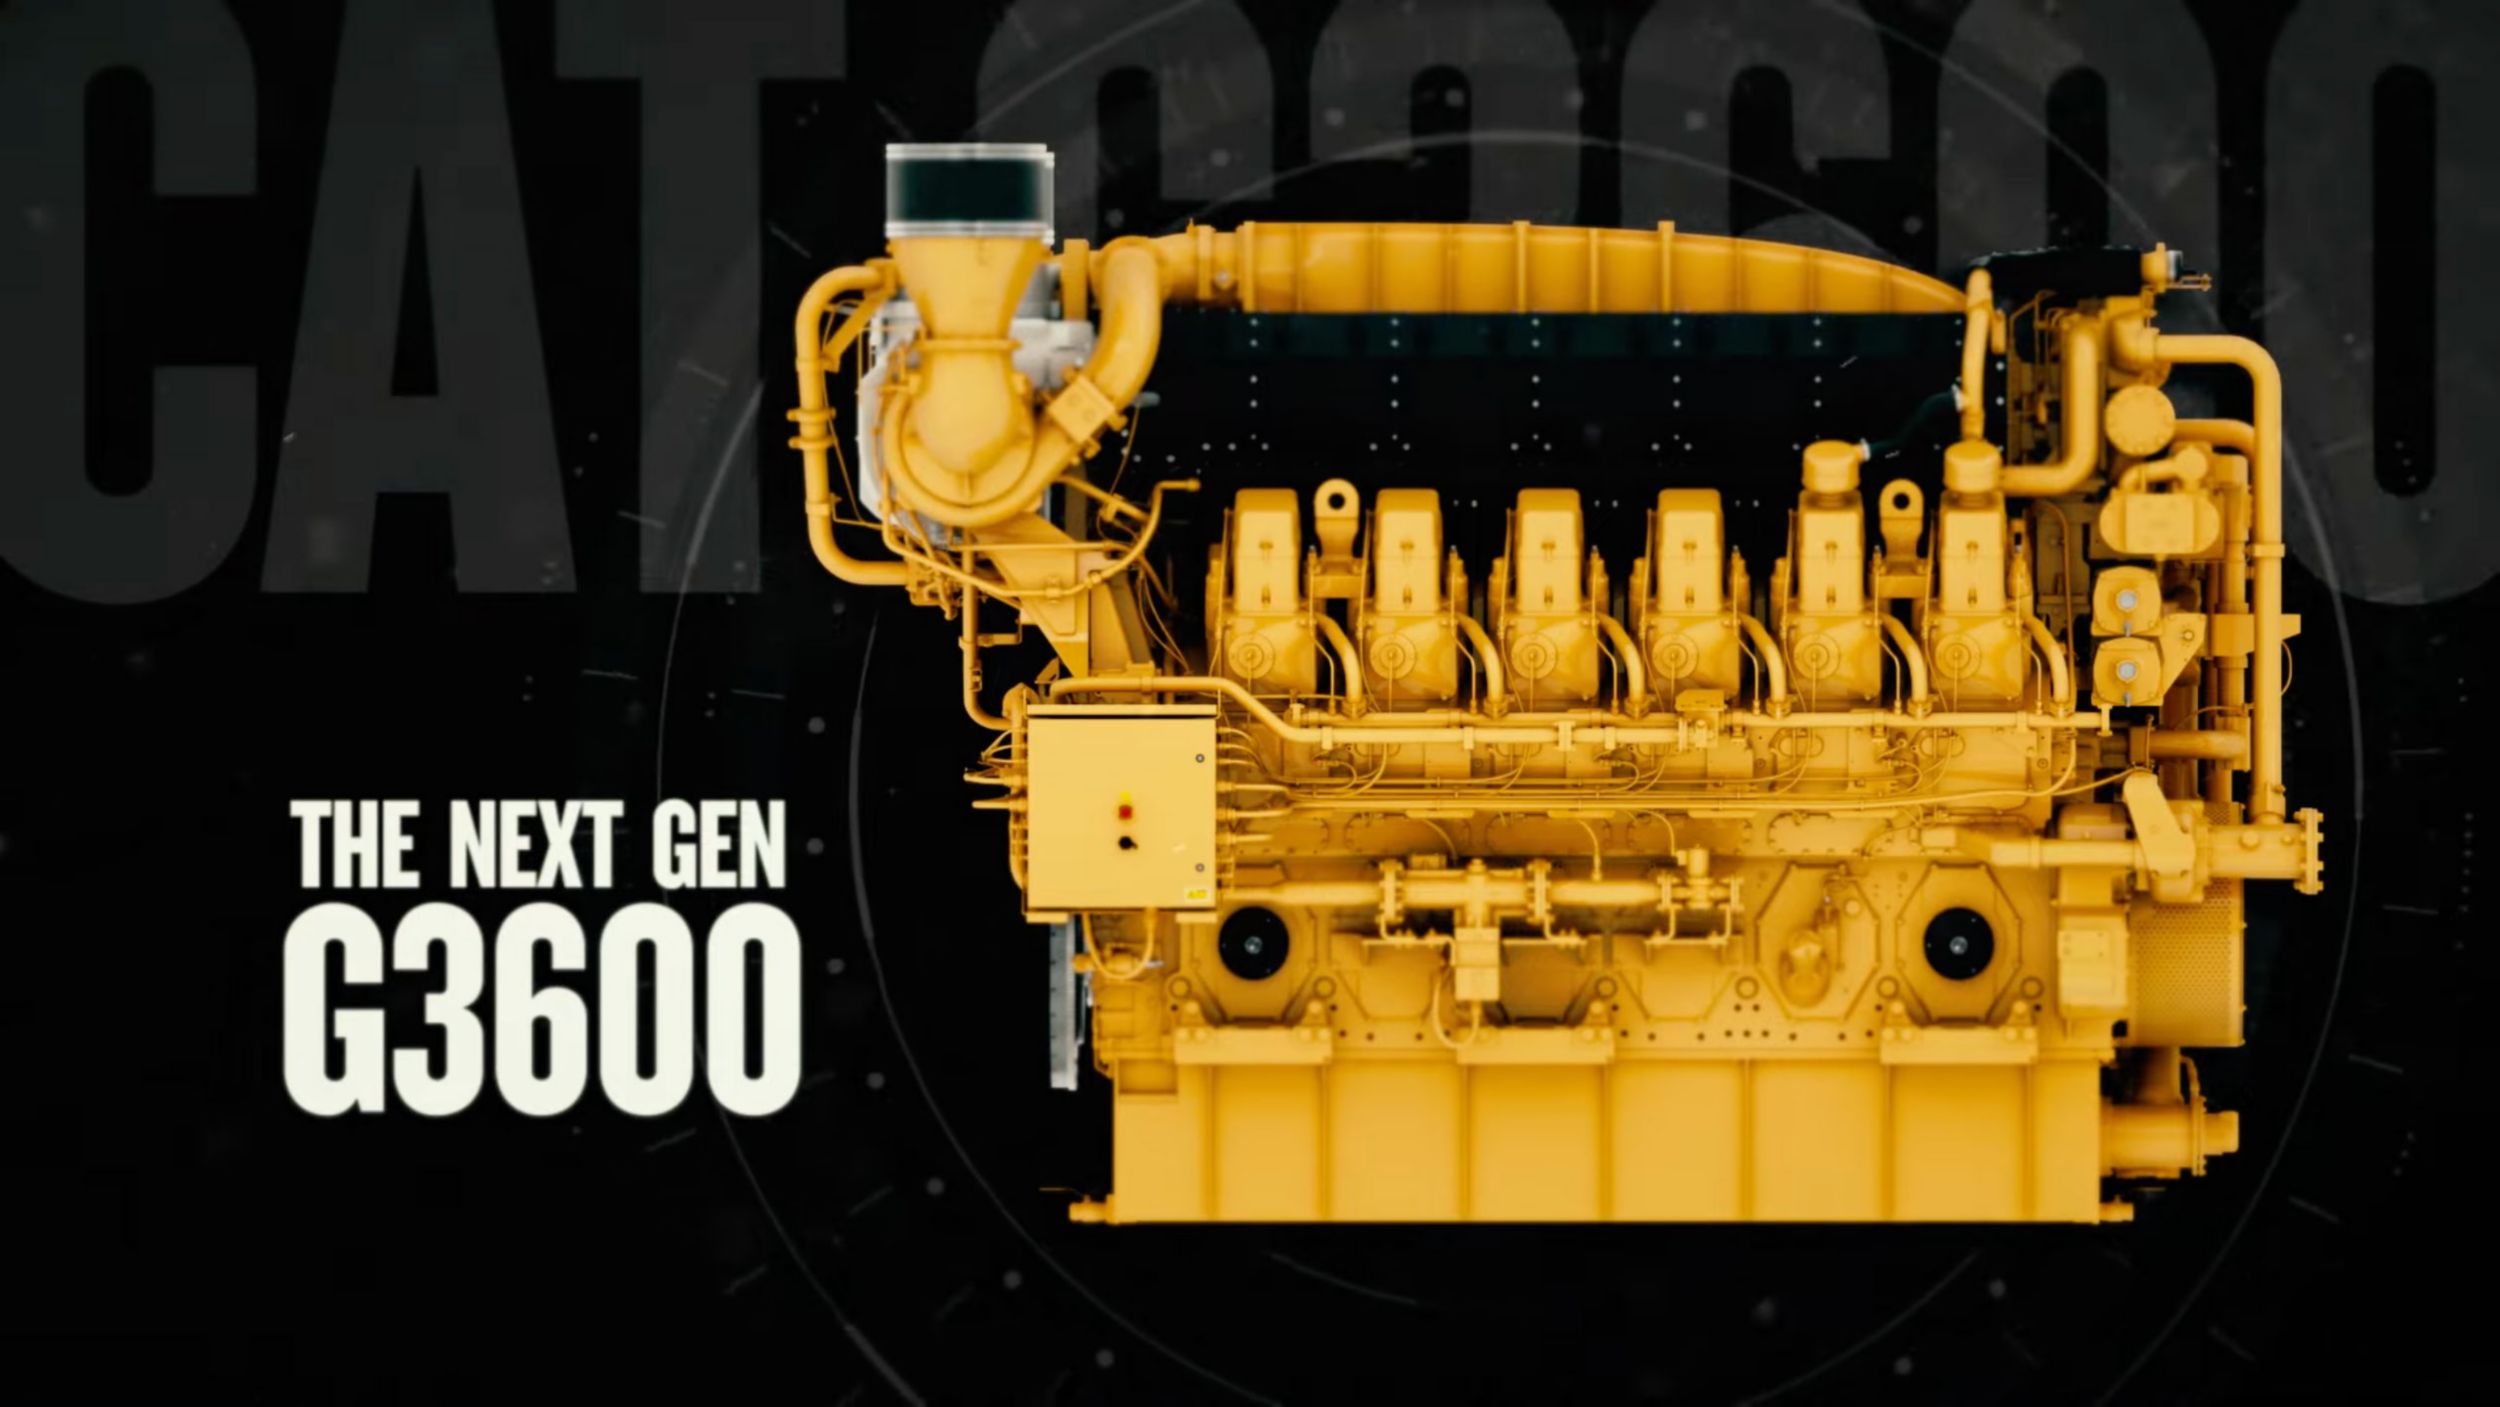 Watch this video to see all the new advantages and benefits of the Next Generation Cat® G3600 engine lineup.